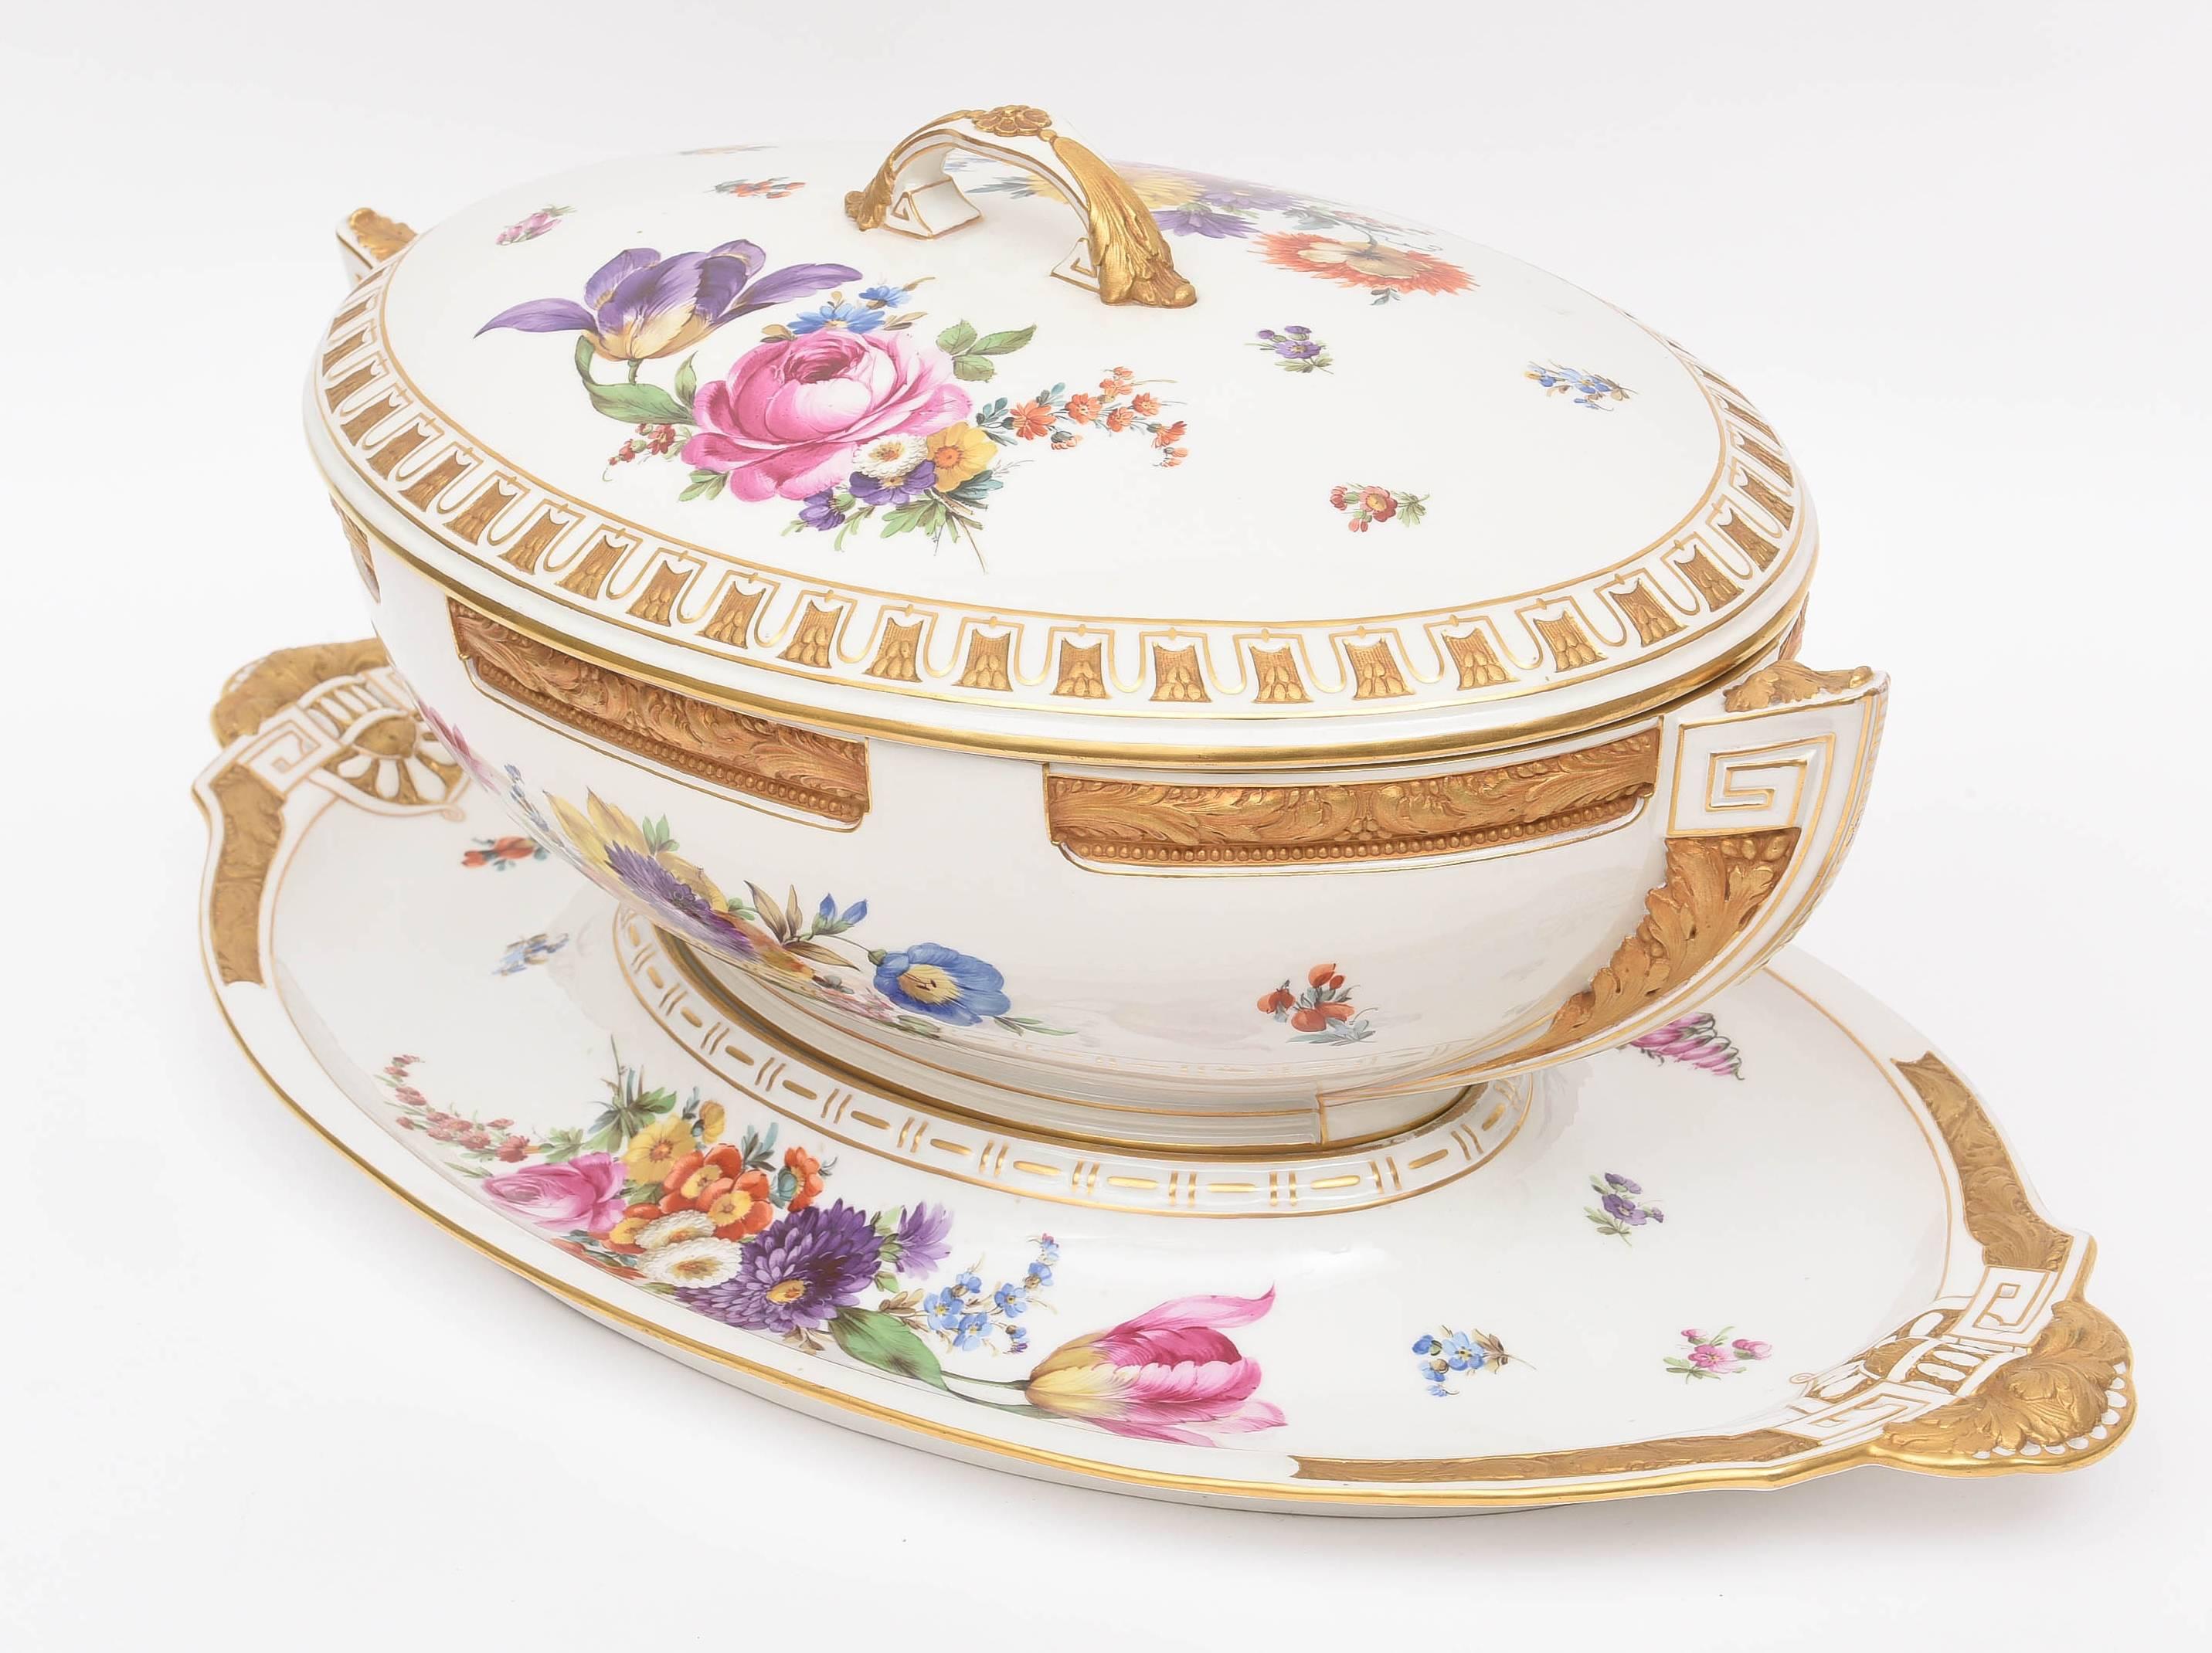 German Impressive 19th century KPM Tureen and Stand, Hand Painted, Gilt Encrusted